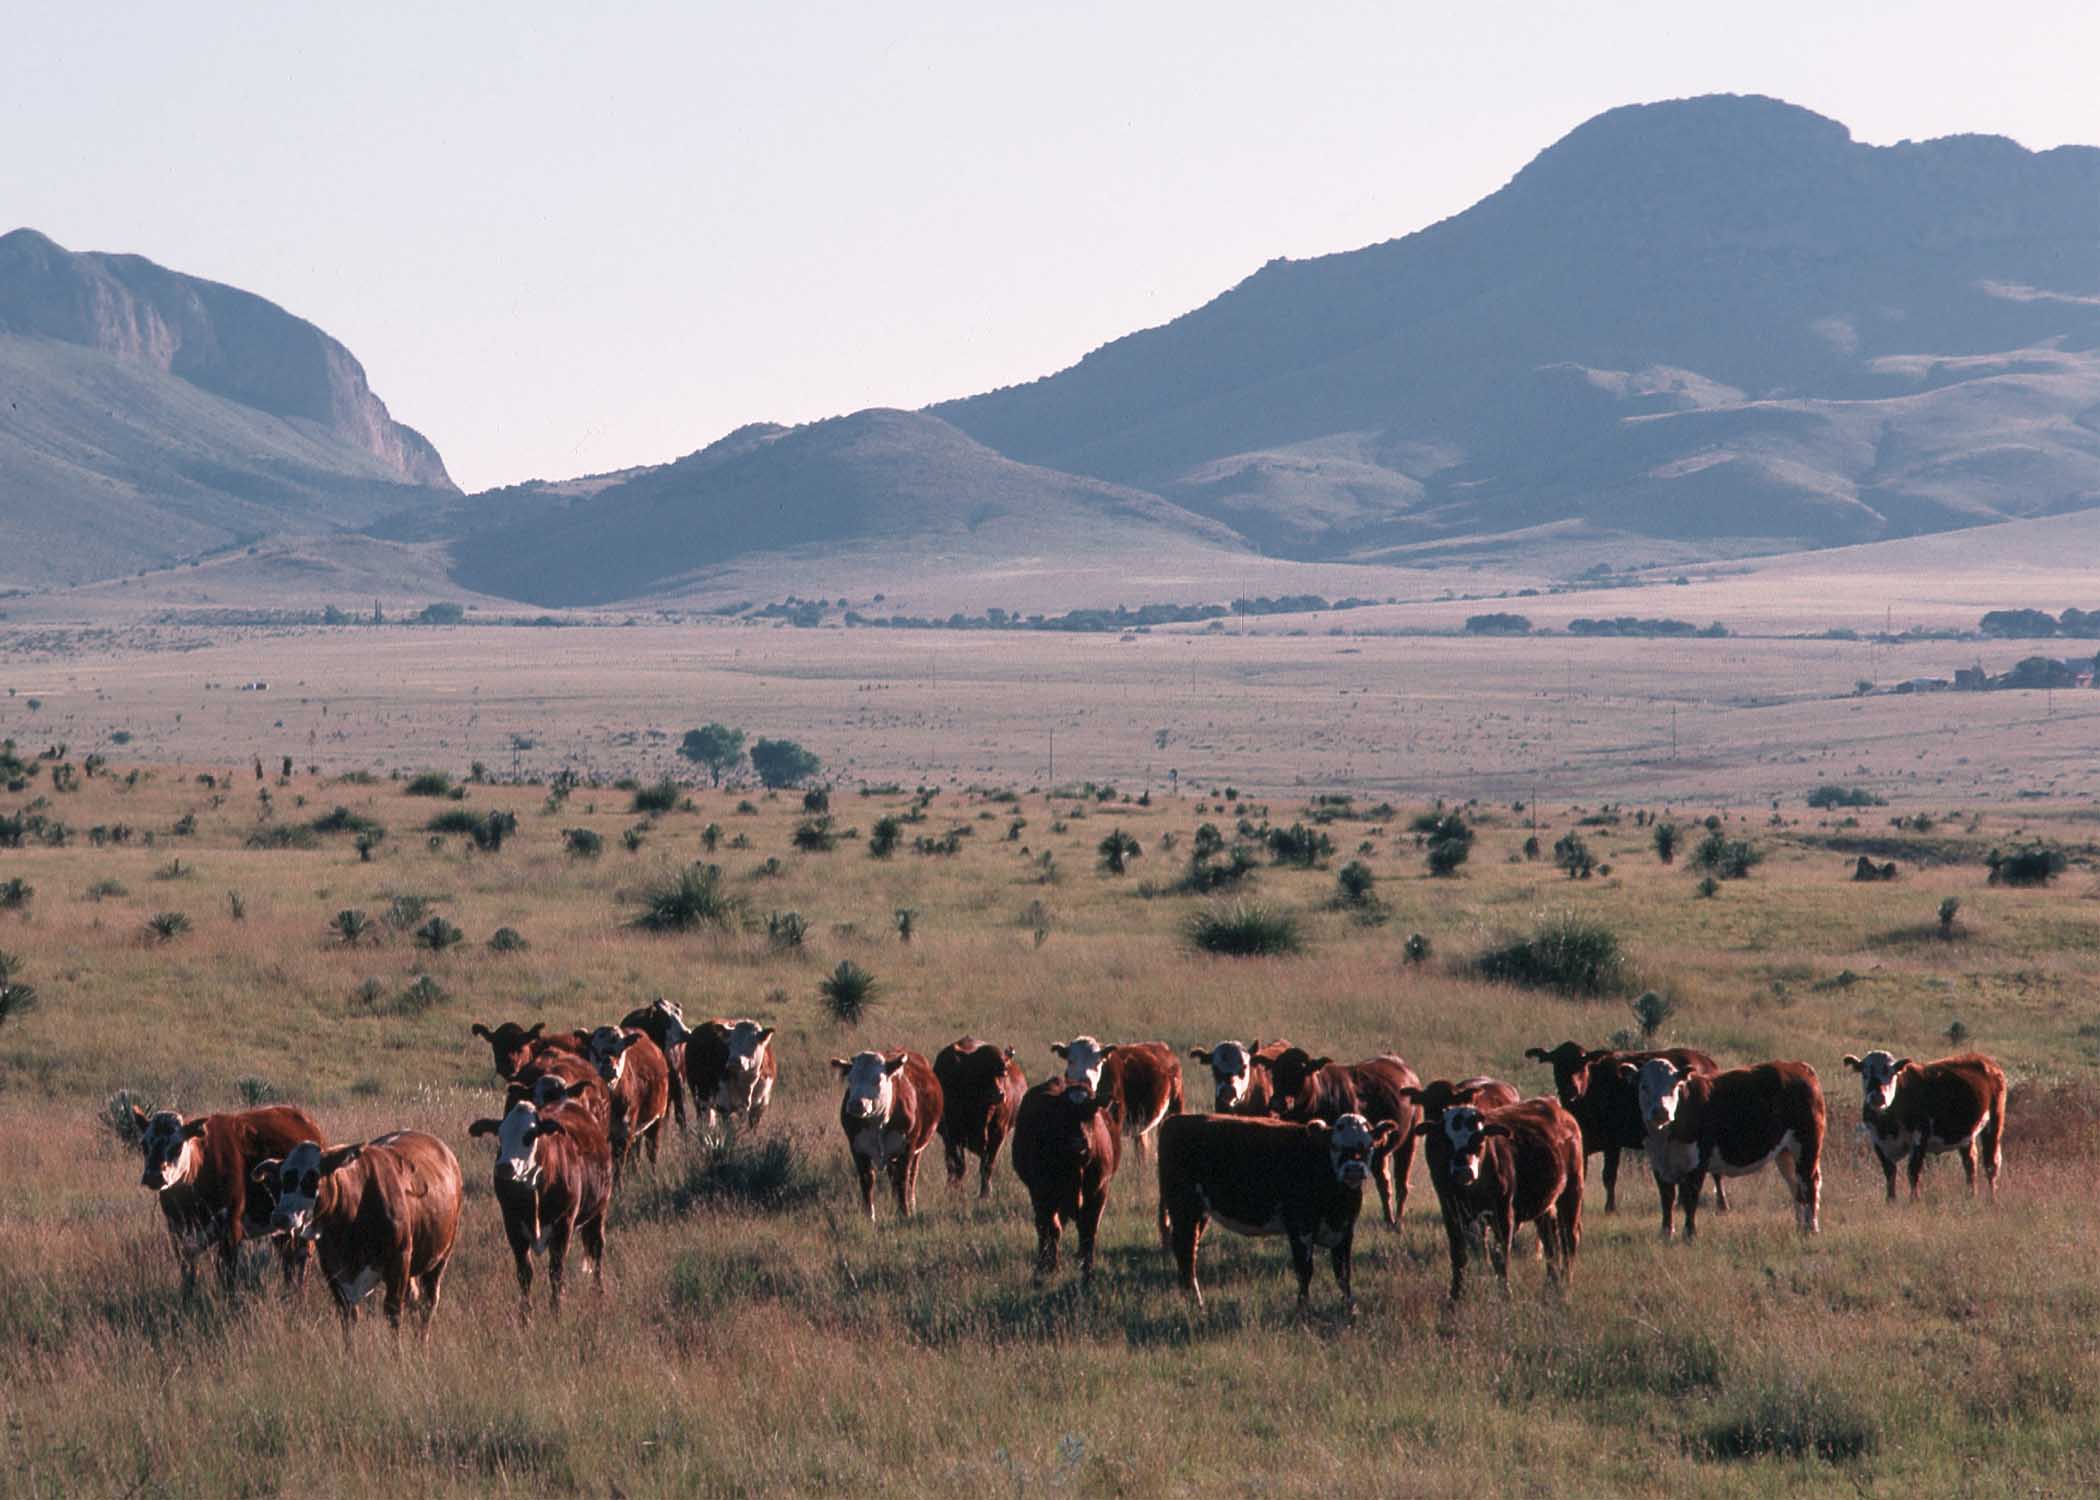 Brown cattle in foreground, all looking towards camera, with mountains in background.